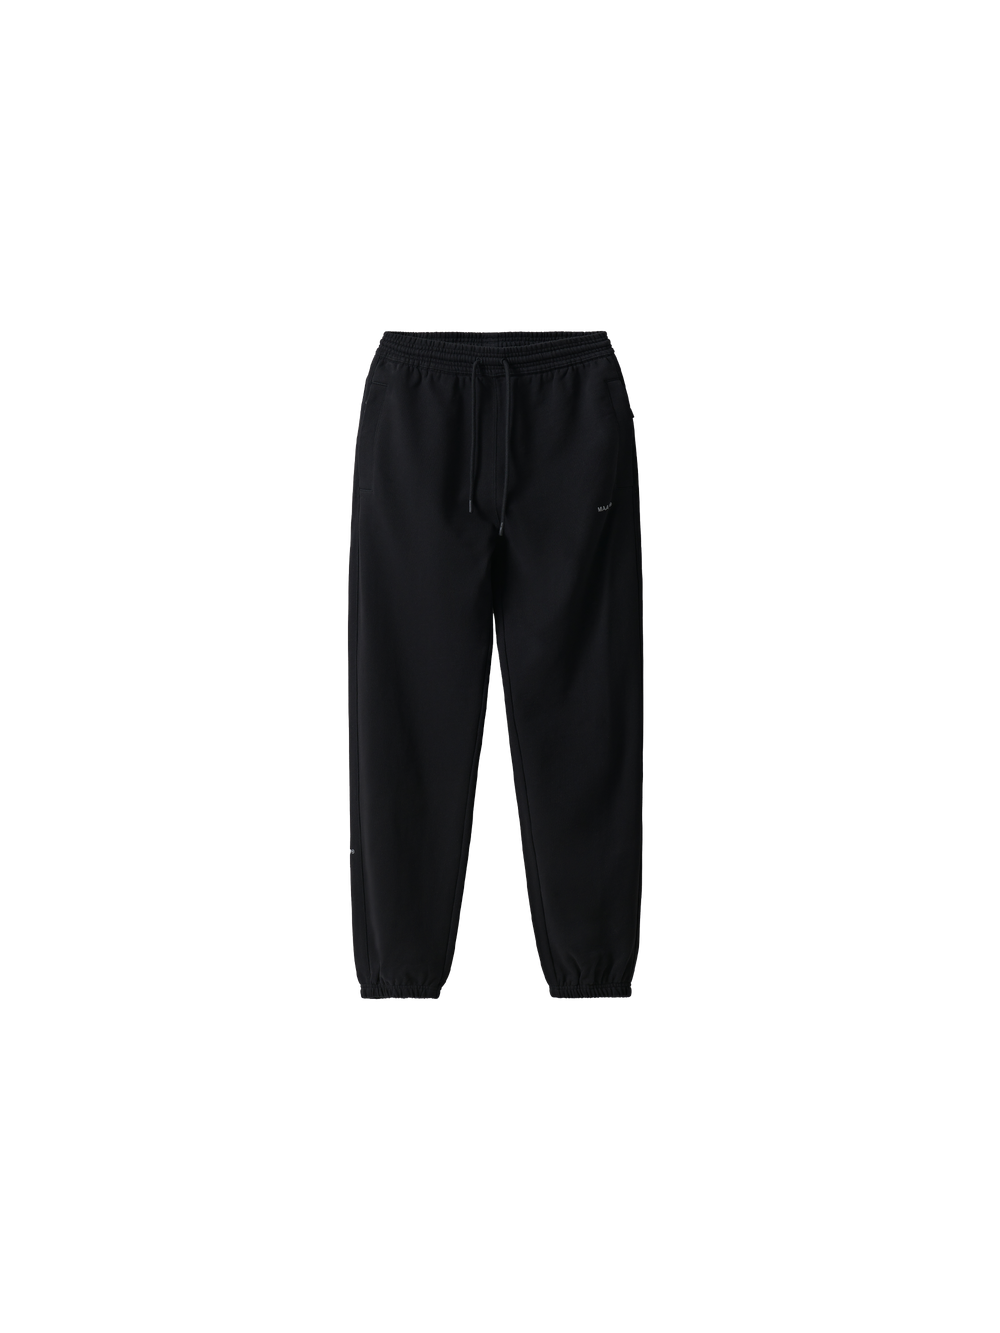 Product Image for Women's Essentials Sweatpant